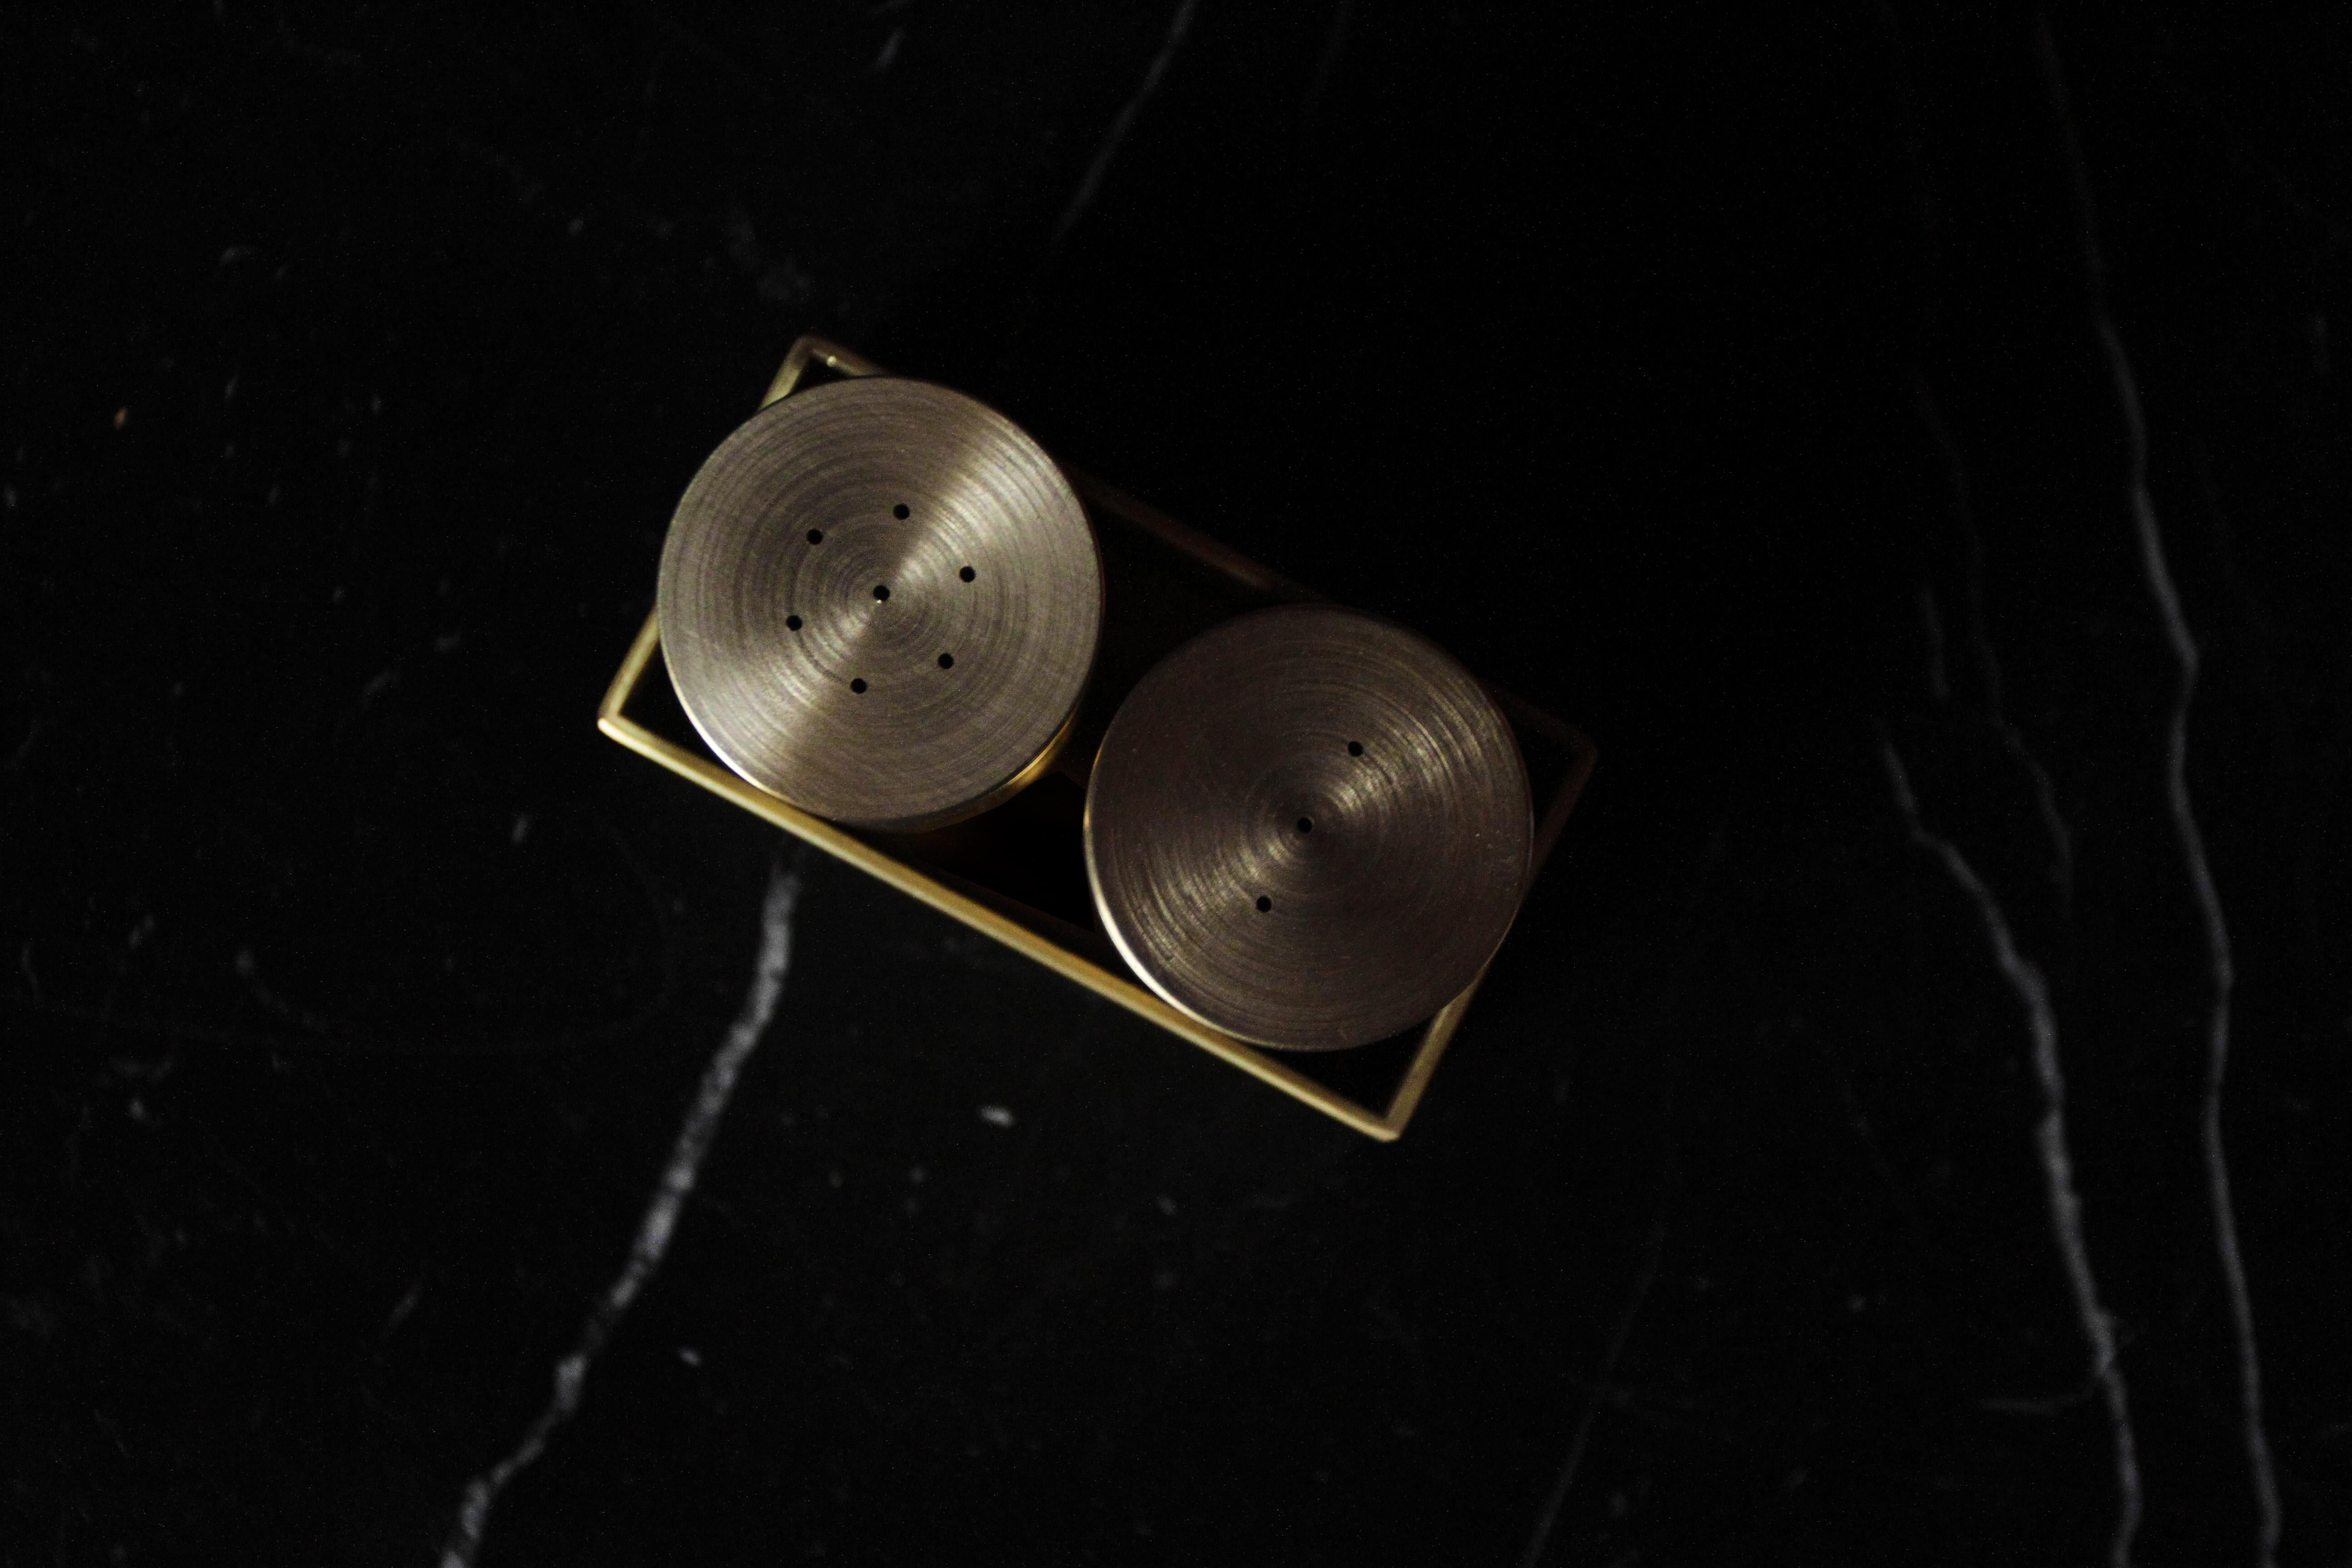 The (wh)ORE HAüS STUDIOS small goods collection was made for those that wanted to experience the (wh)ORE HAüS brand without committing to our larger pieces. Our Brass Salt and Pepper Shaker is made of solid brass and is a statement piece on any